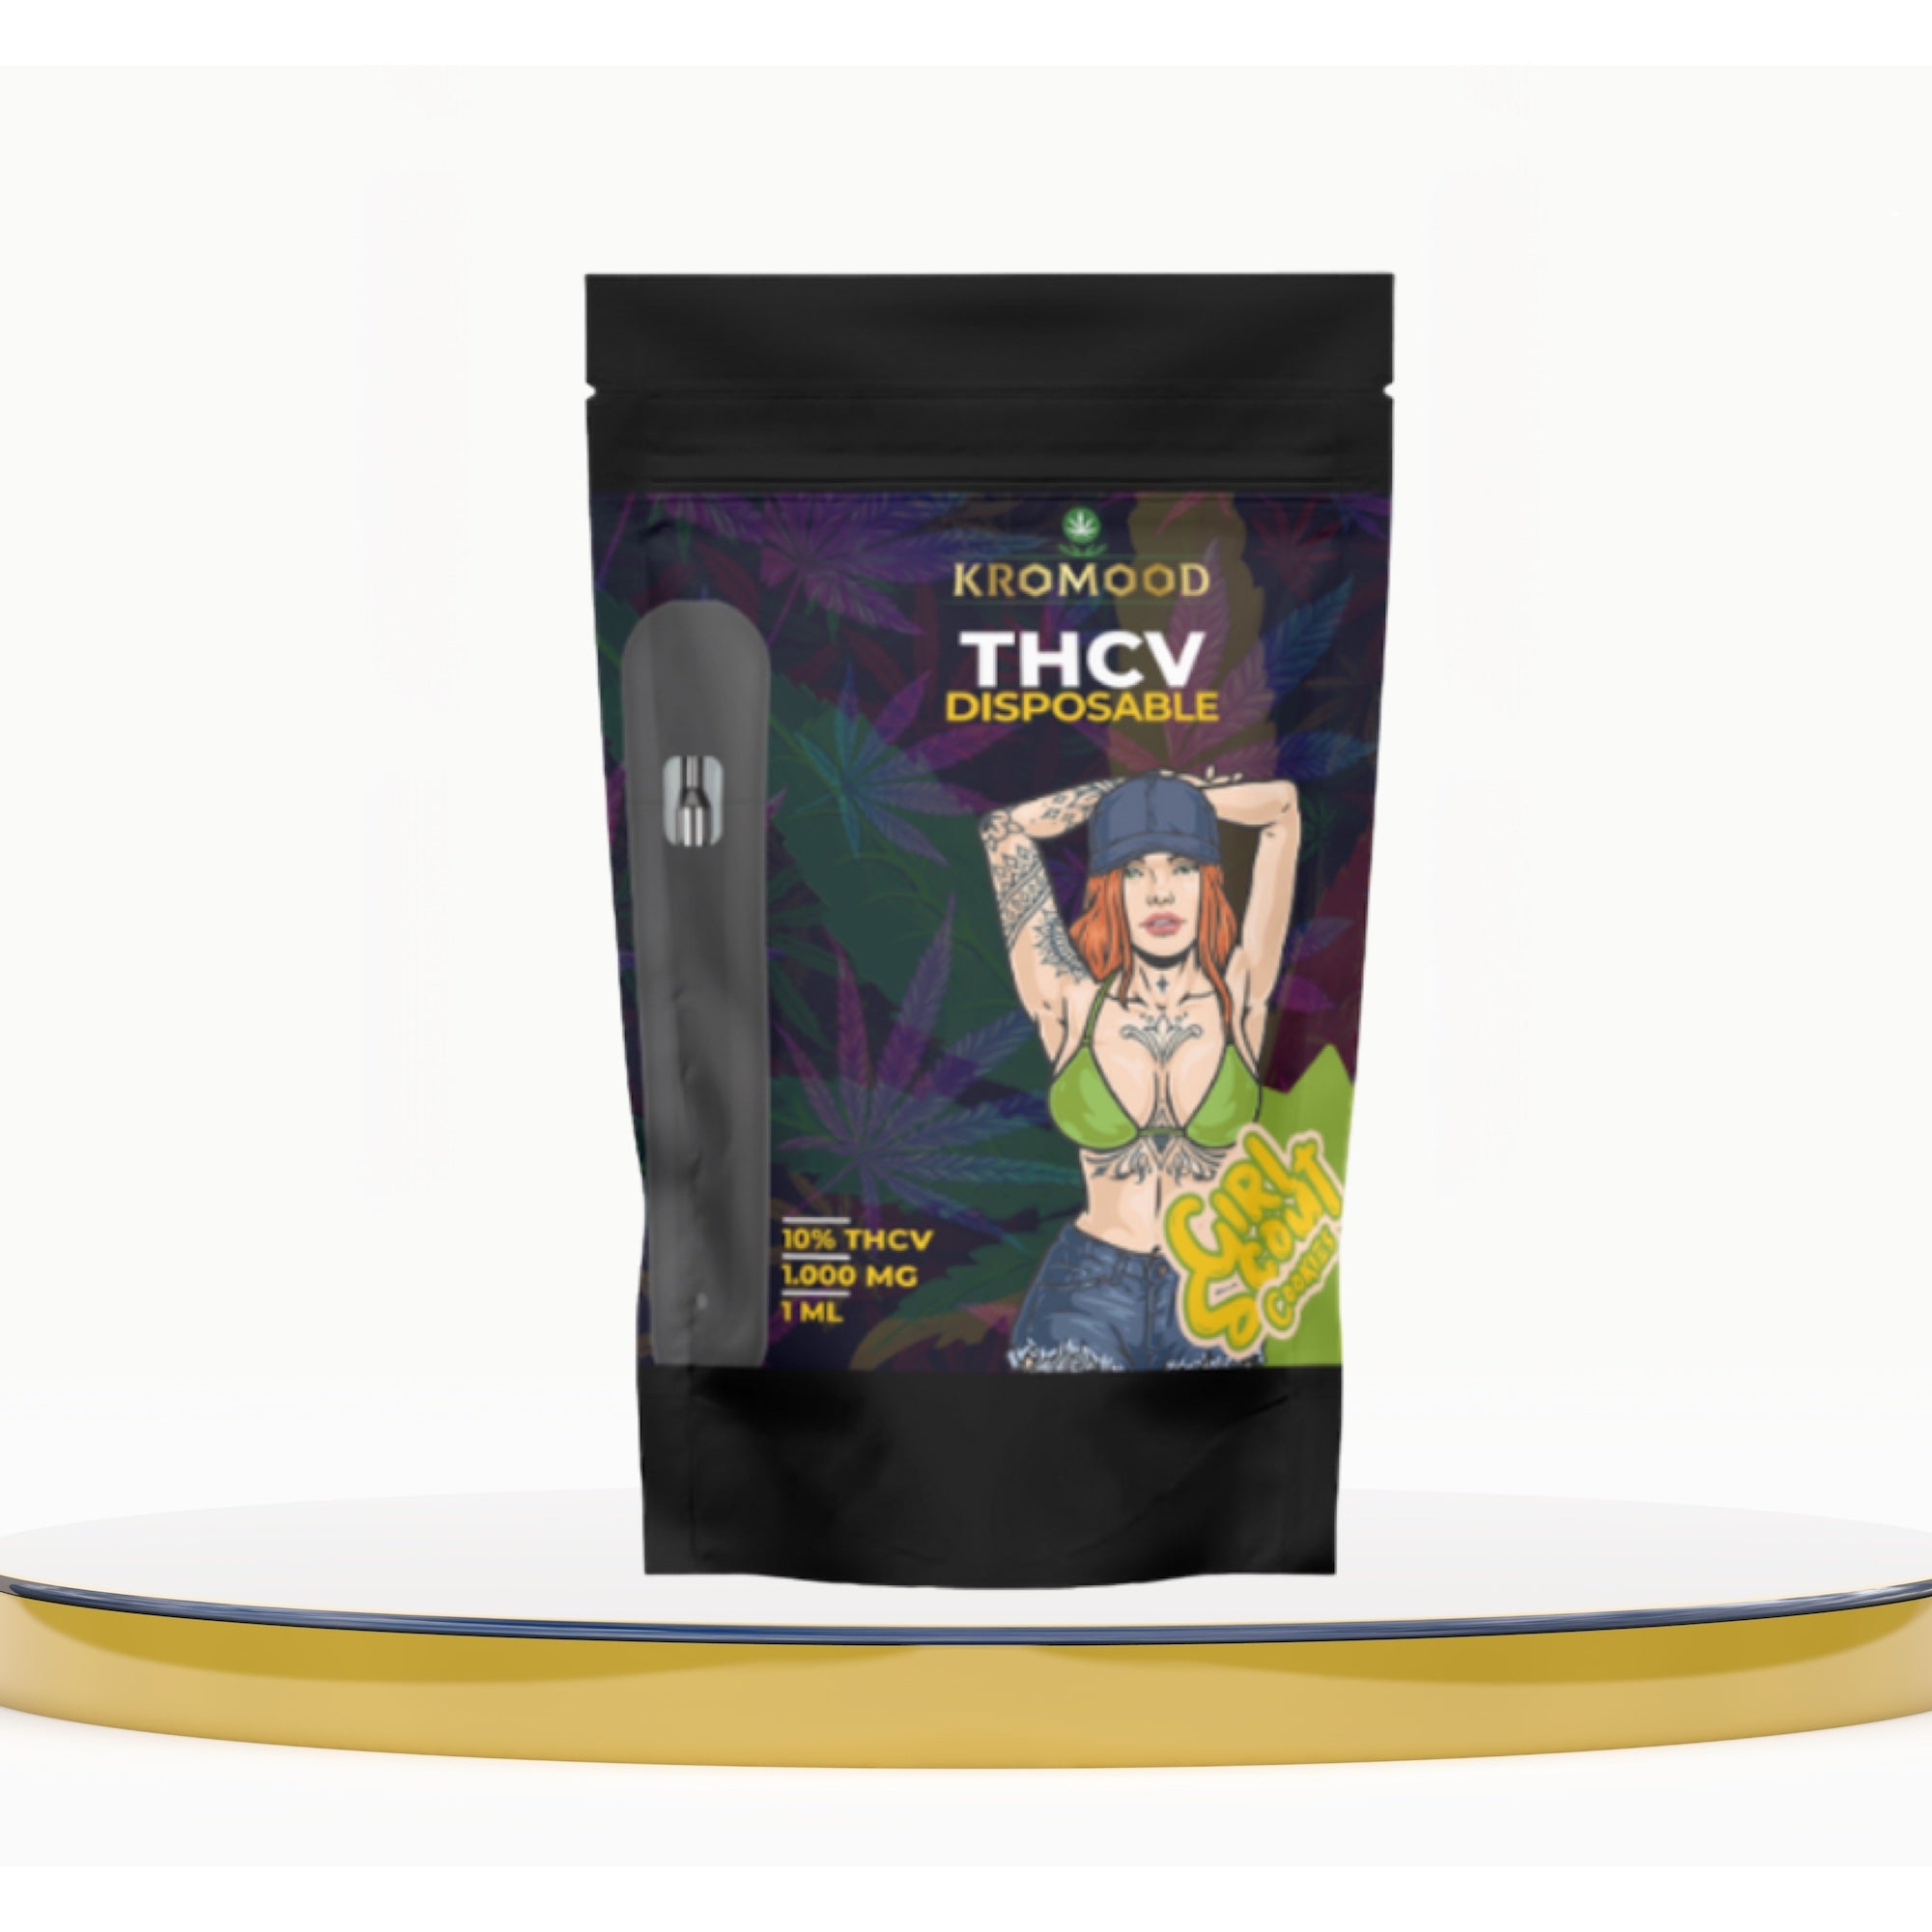 KroMood THCV Disposable Puff - Girl Scout Cookies: The Art of Sublimated Vaping, 10% THCV/1ML, 600 Puffs, CCELL Puff Technology 